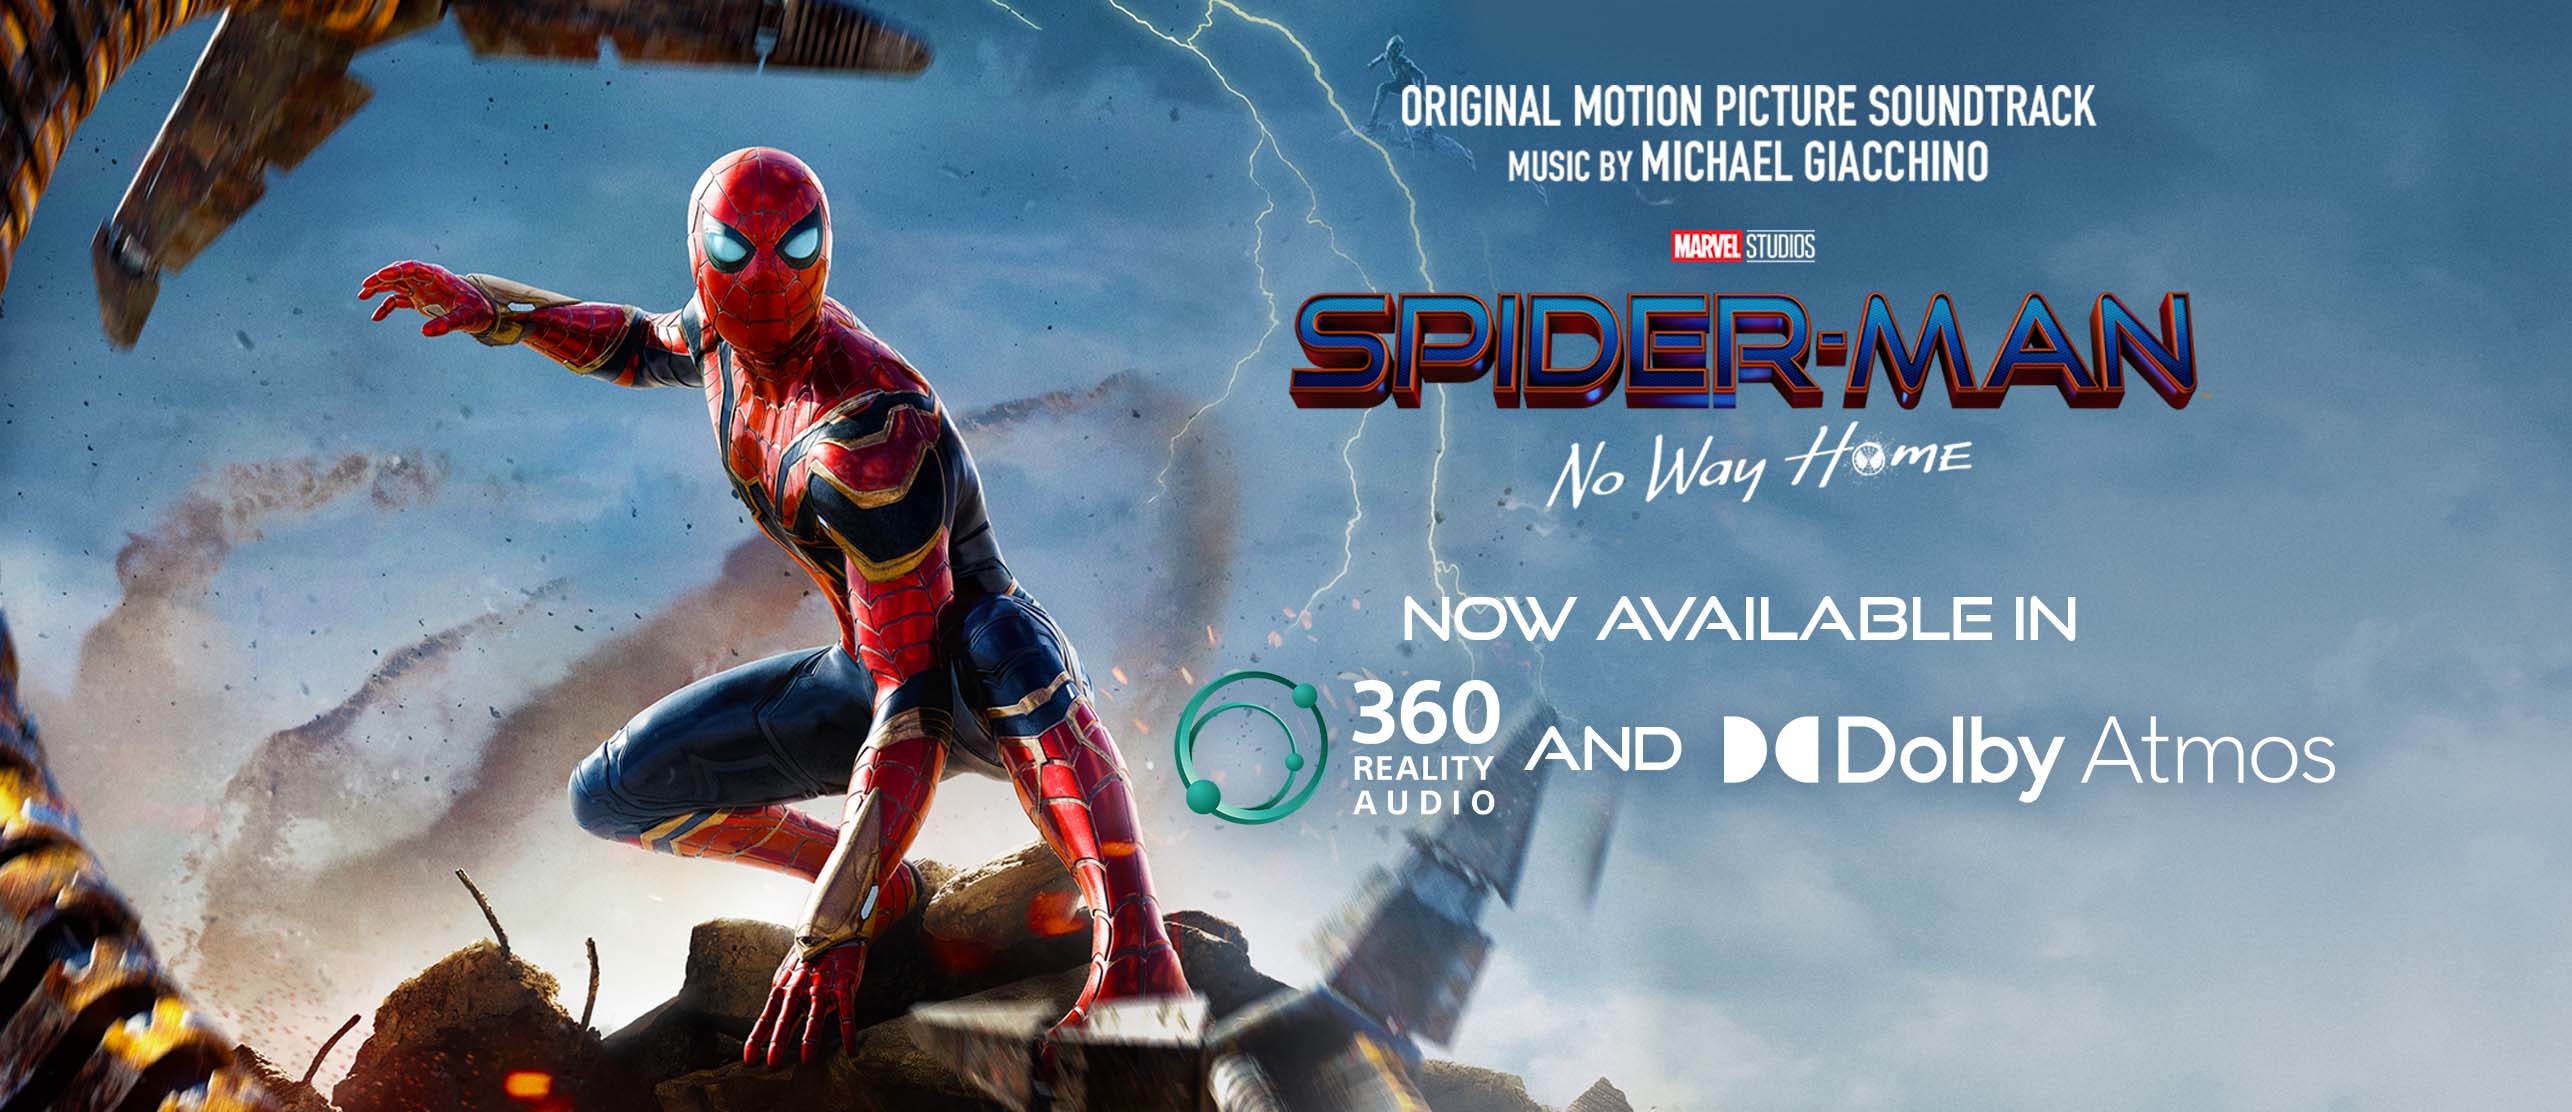 Spider-Man: No Way Home Original Motion Picture Soundtrack Music by Michael Giacchino Now Available in 360 Reality Audio and Dolby Atmos